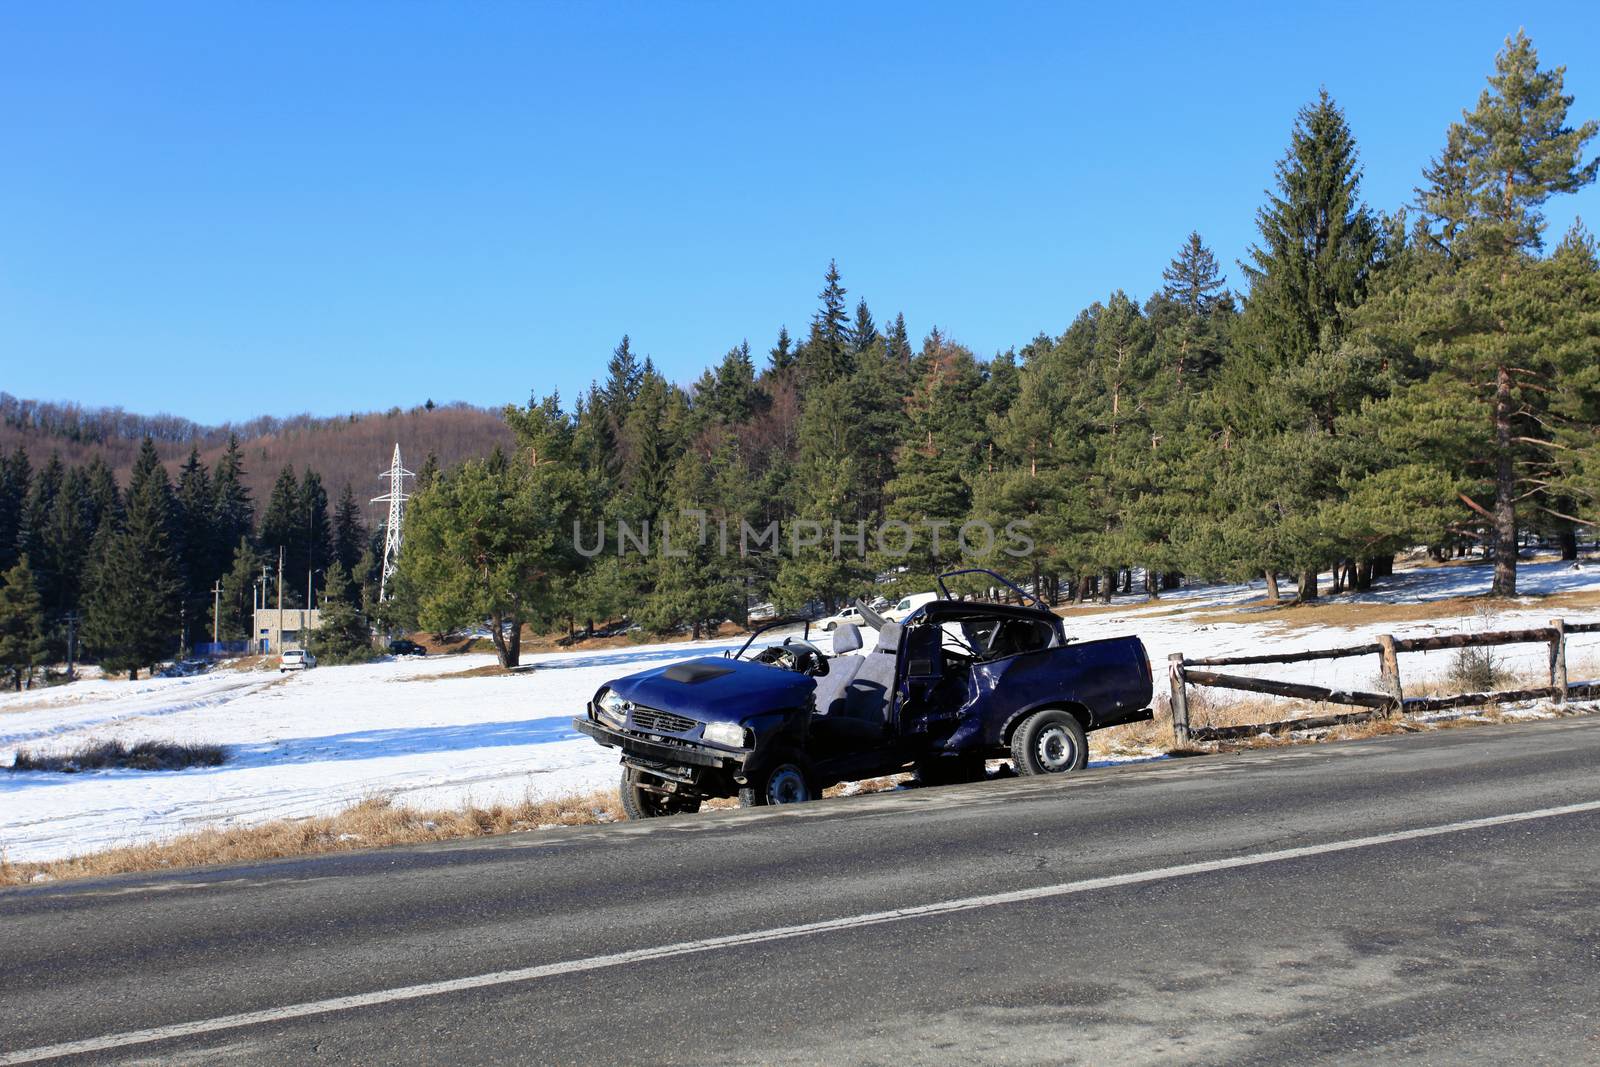 Front of blue car damaged by crash accident on side of the road by PixAchi